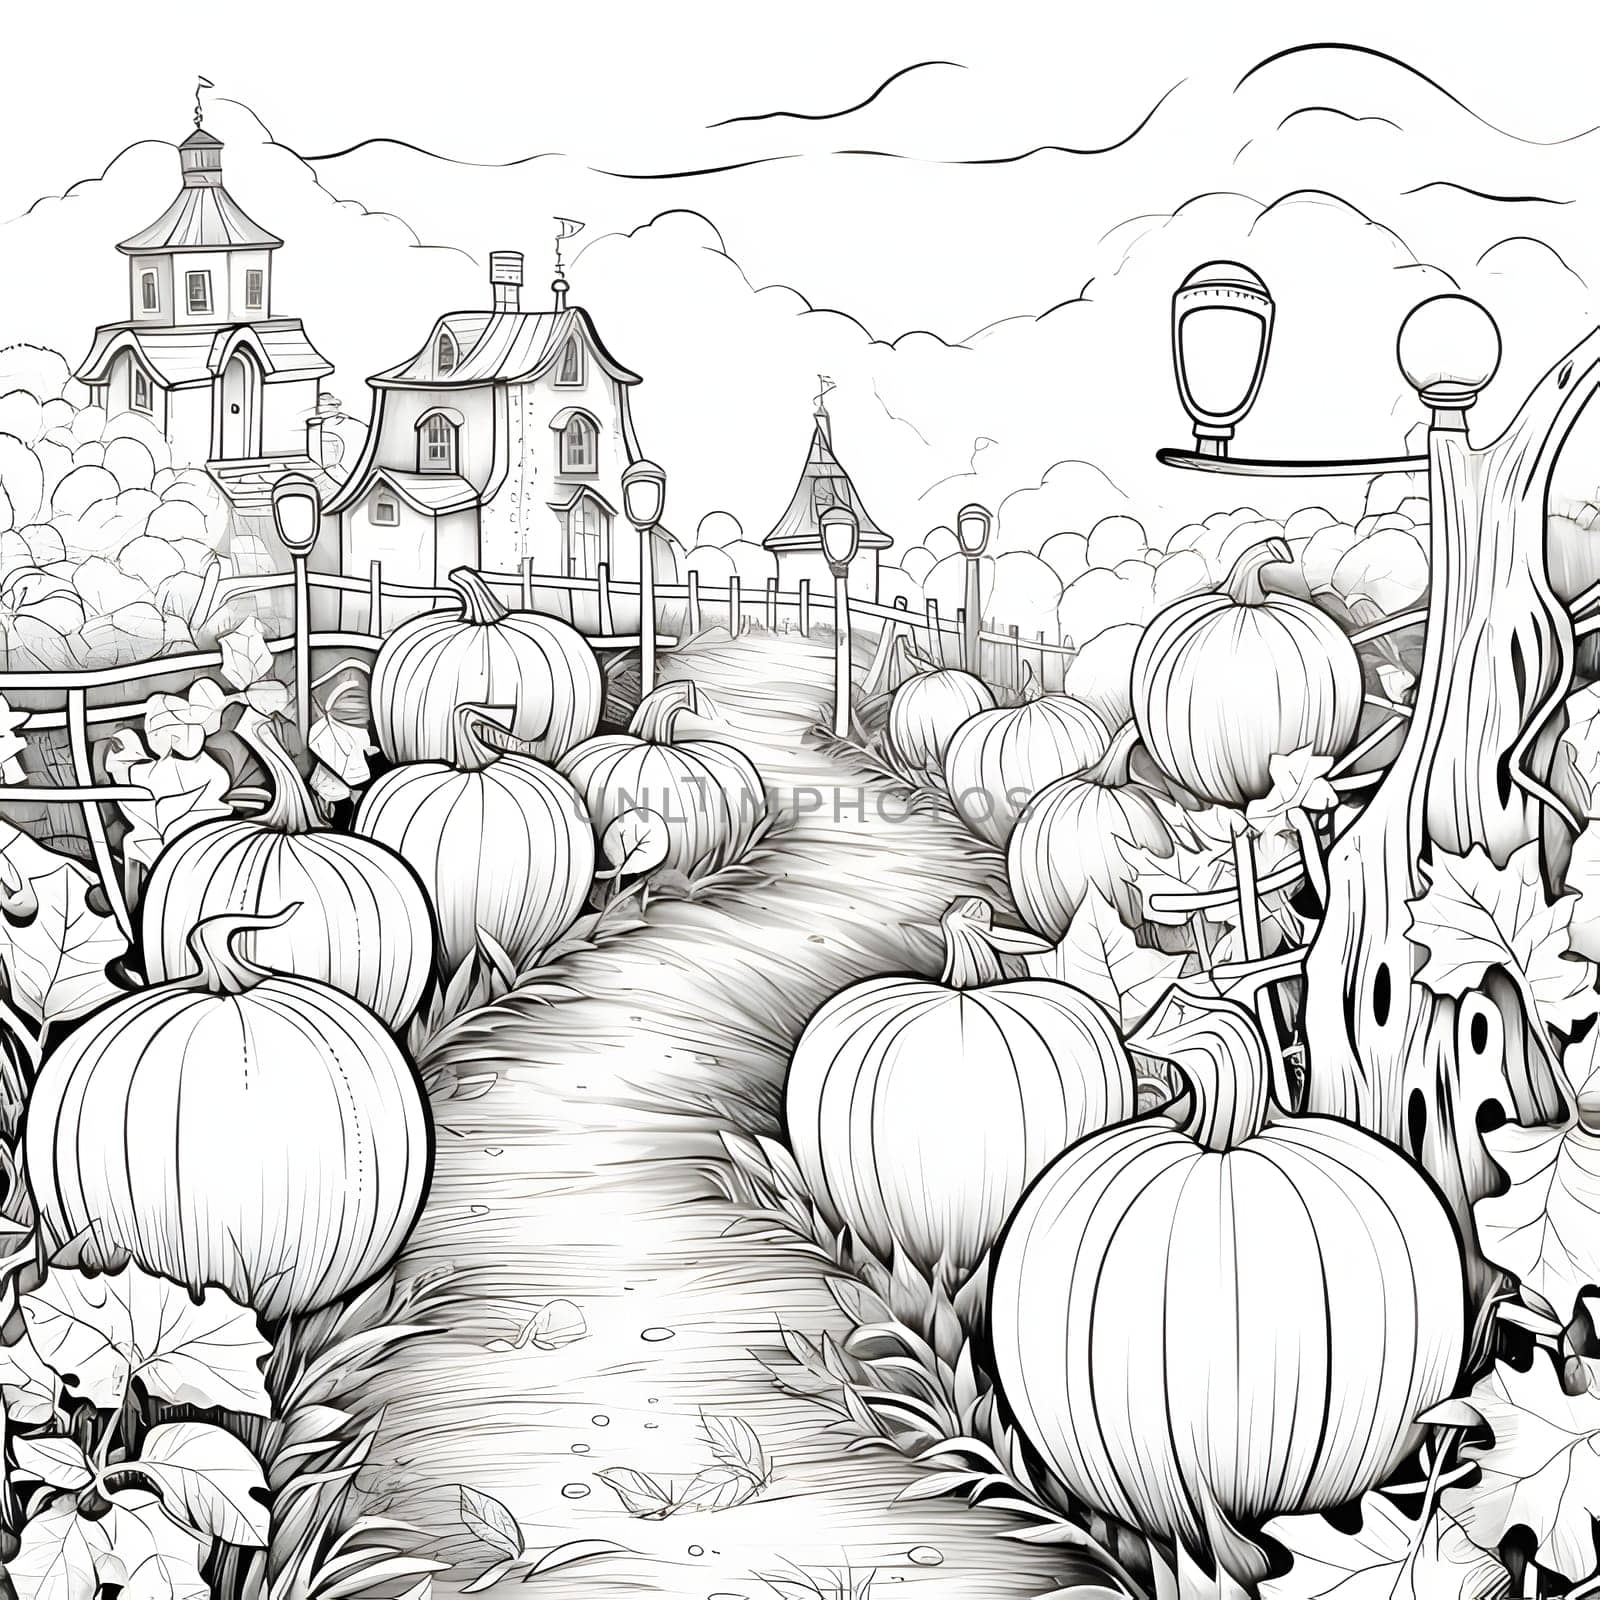 Black and white coloring book path to the mansion next to it pumpkins and leaves. Pumpkin as a dish of thanksgiving for the harvest, picture on a white isolated background. An atmosphere of joy and celebration.